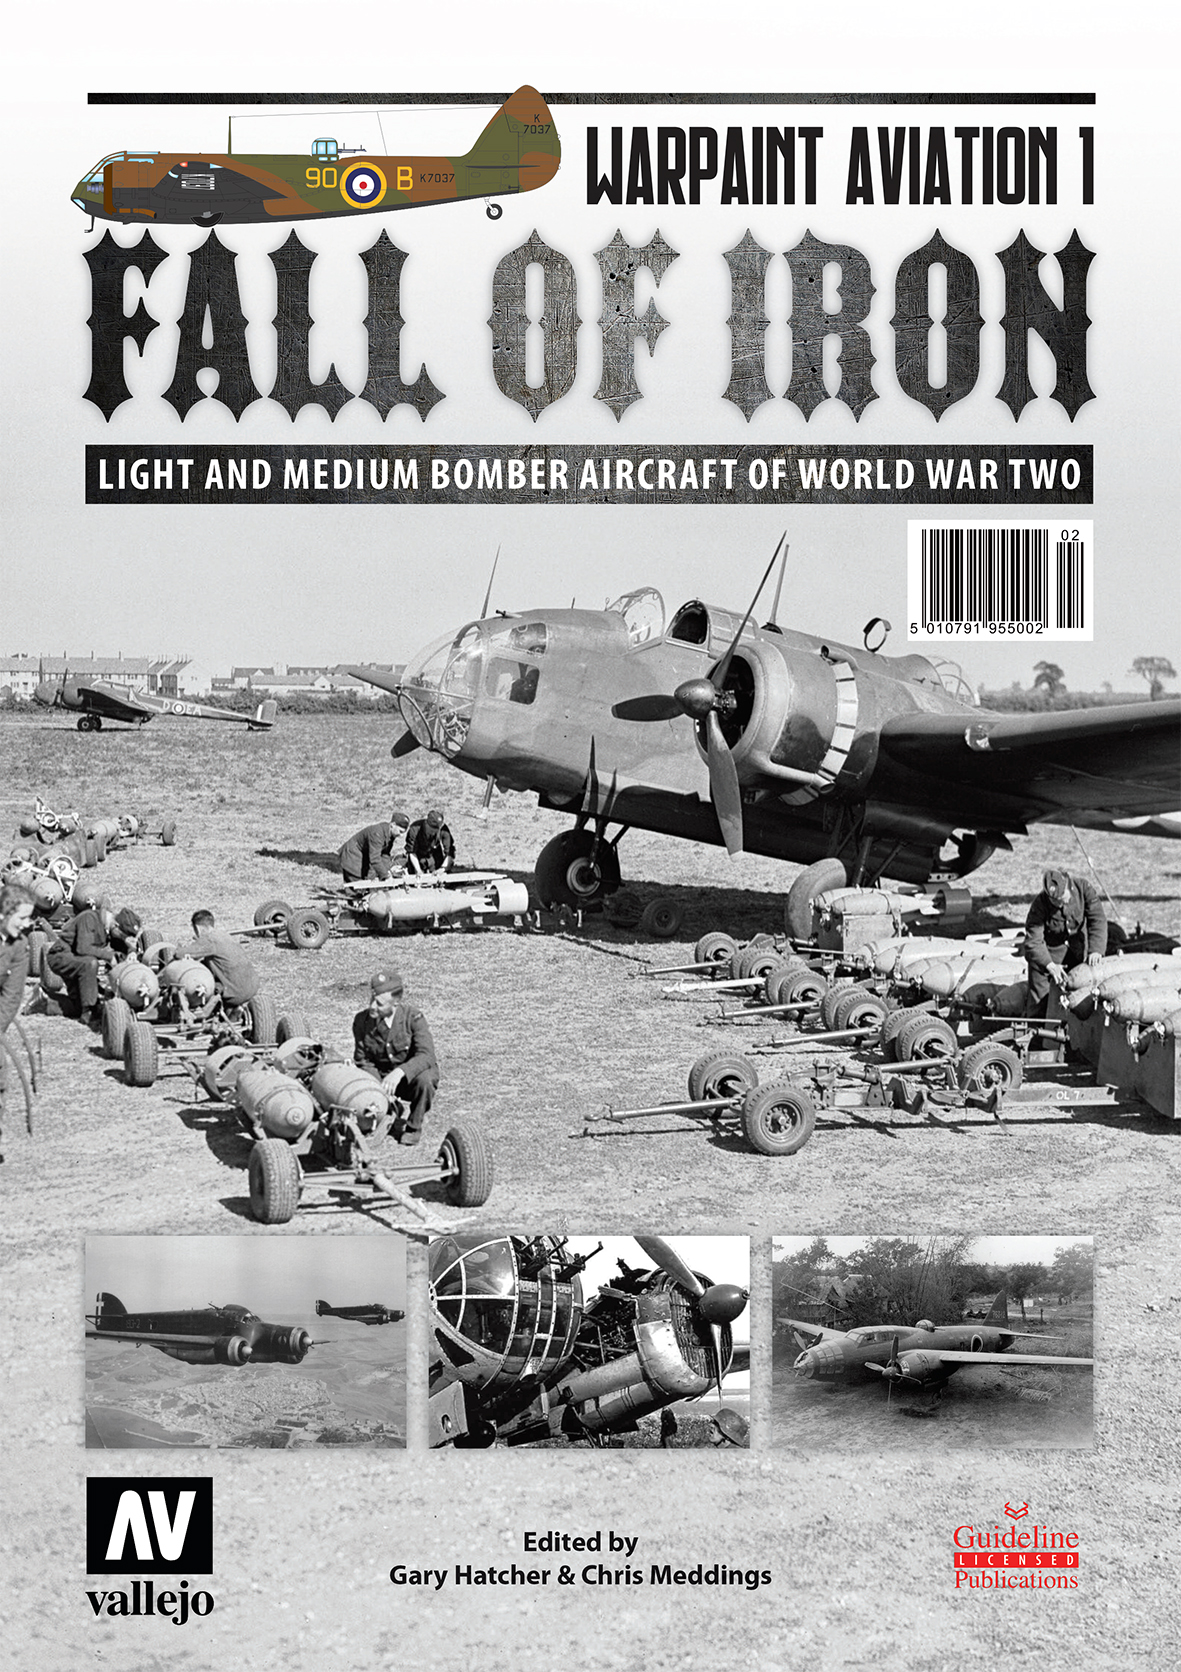 Guideline Publications Fall of Iron Light and Medium bomber Light and Medium bomber aircraft of World War 2 